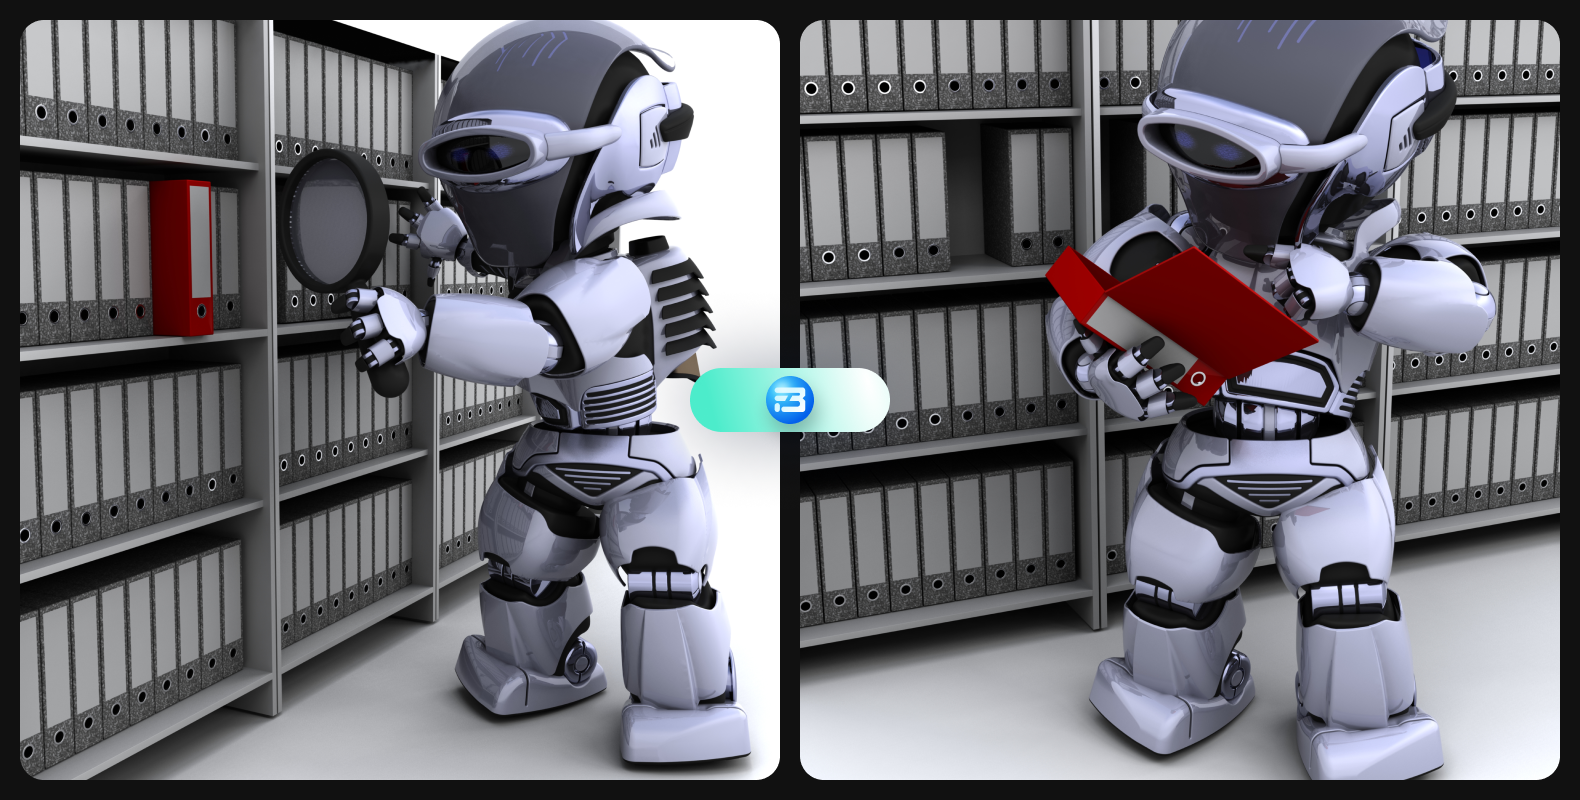 This image showcases a CGI robot taking and reading off-the-shelf data, demonstrating the capabilities of speech recognition technology. 